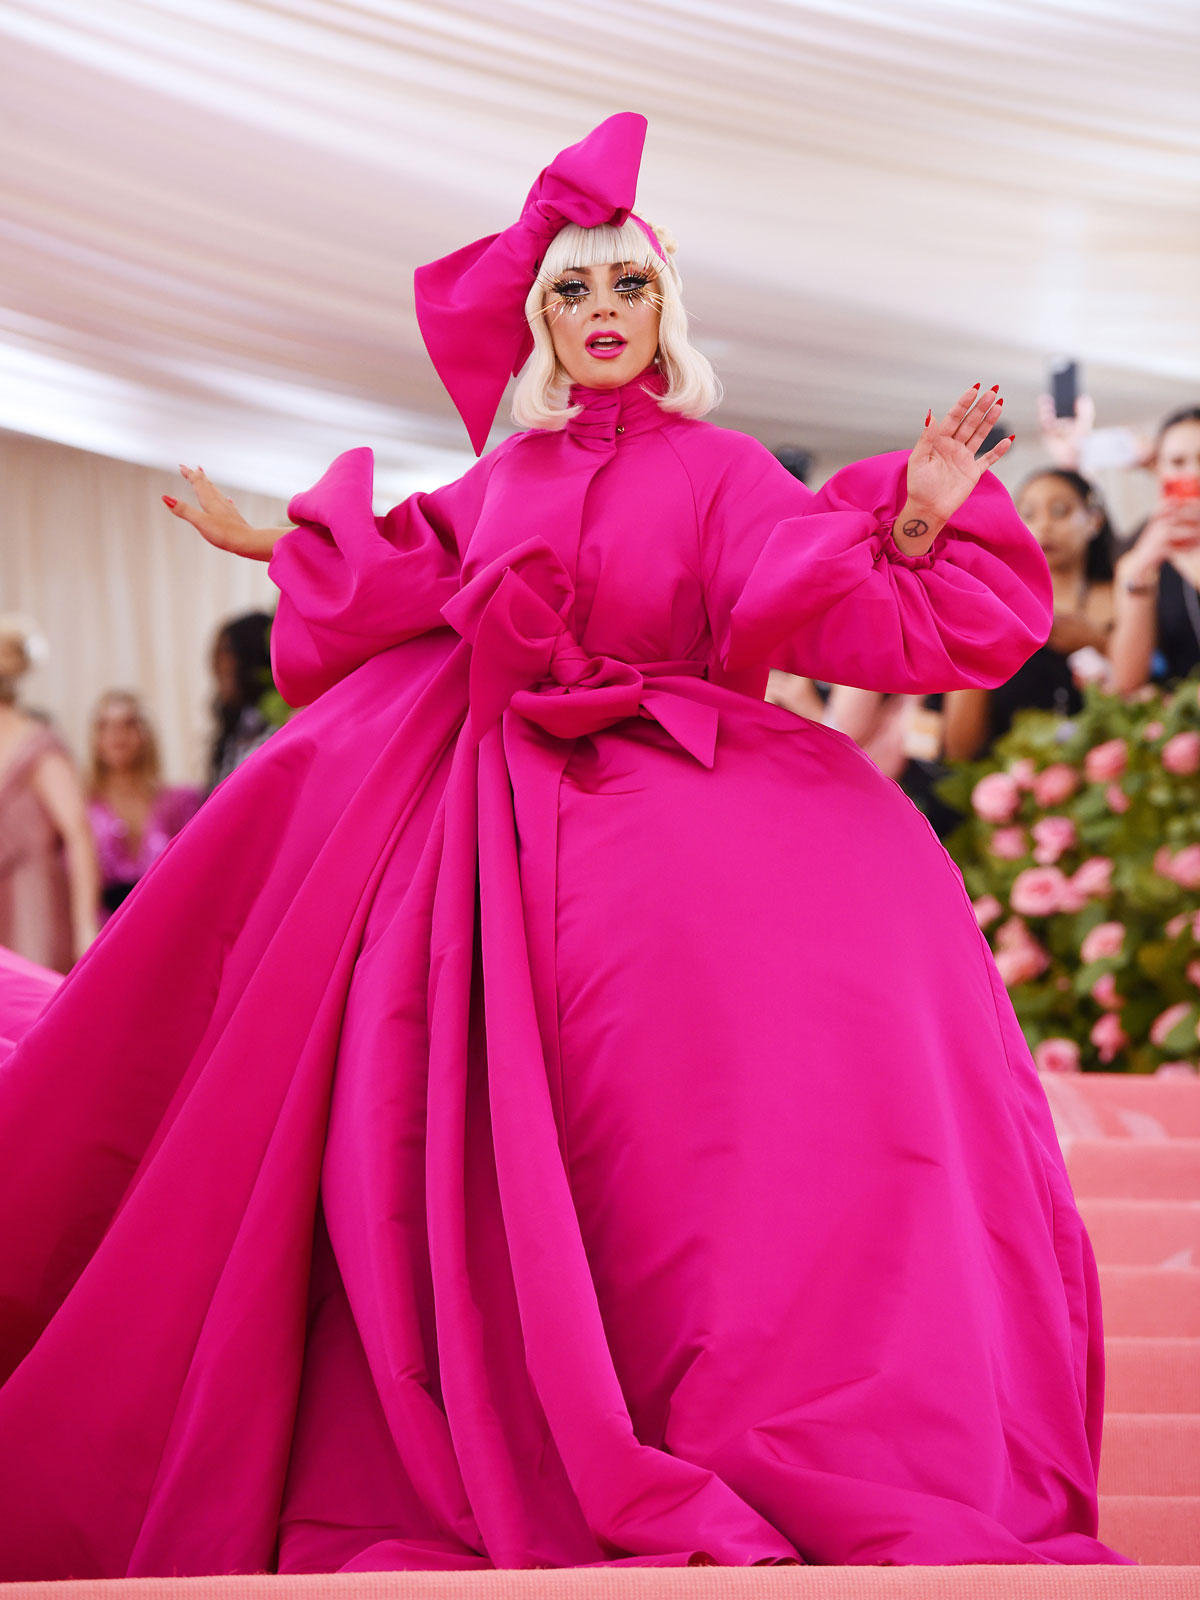 Lady Gaga wears a voluminous pink gown.